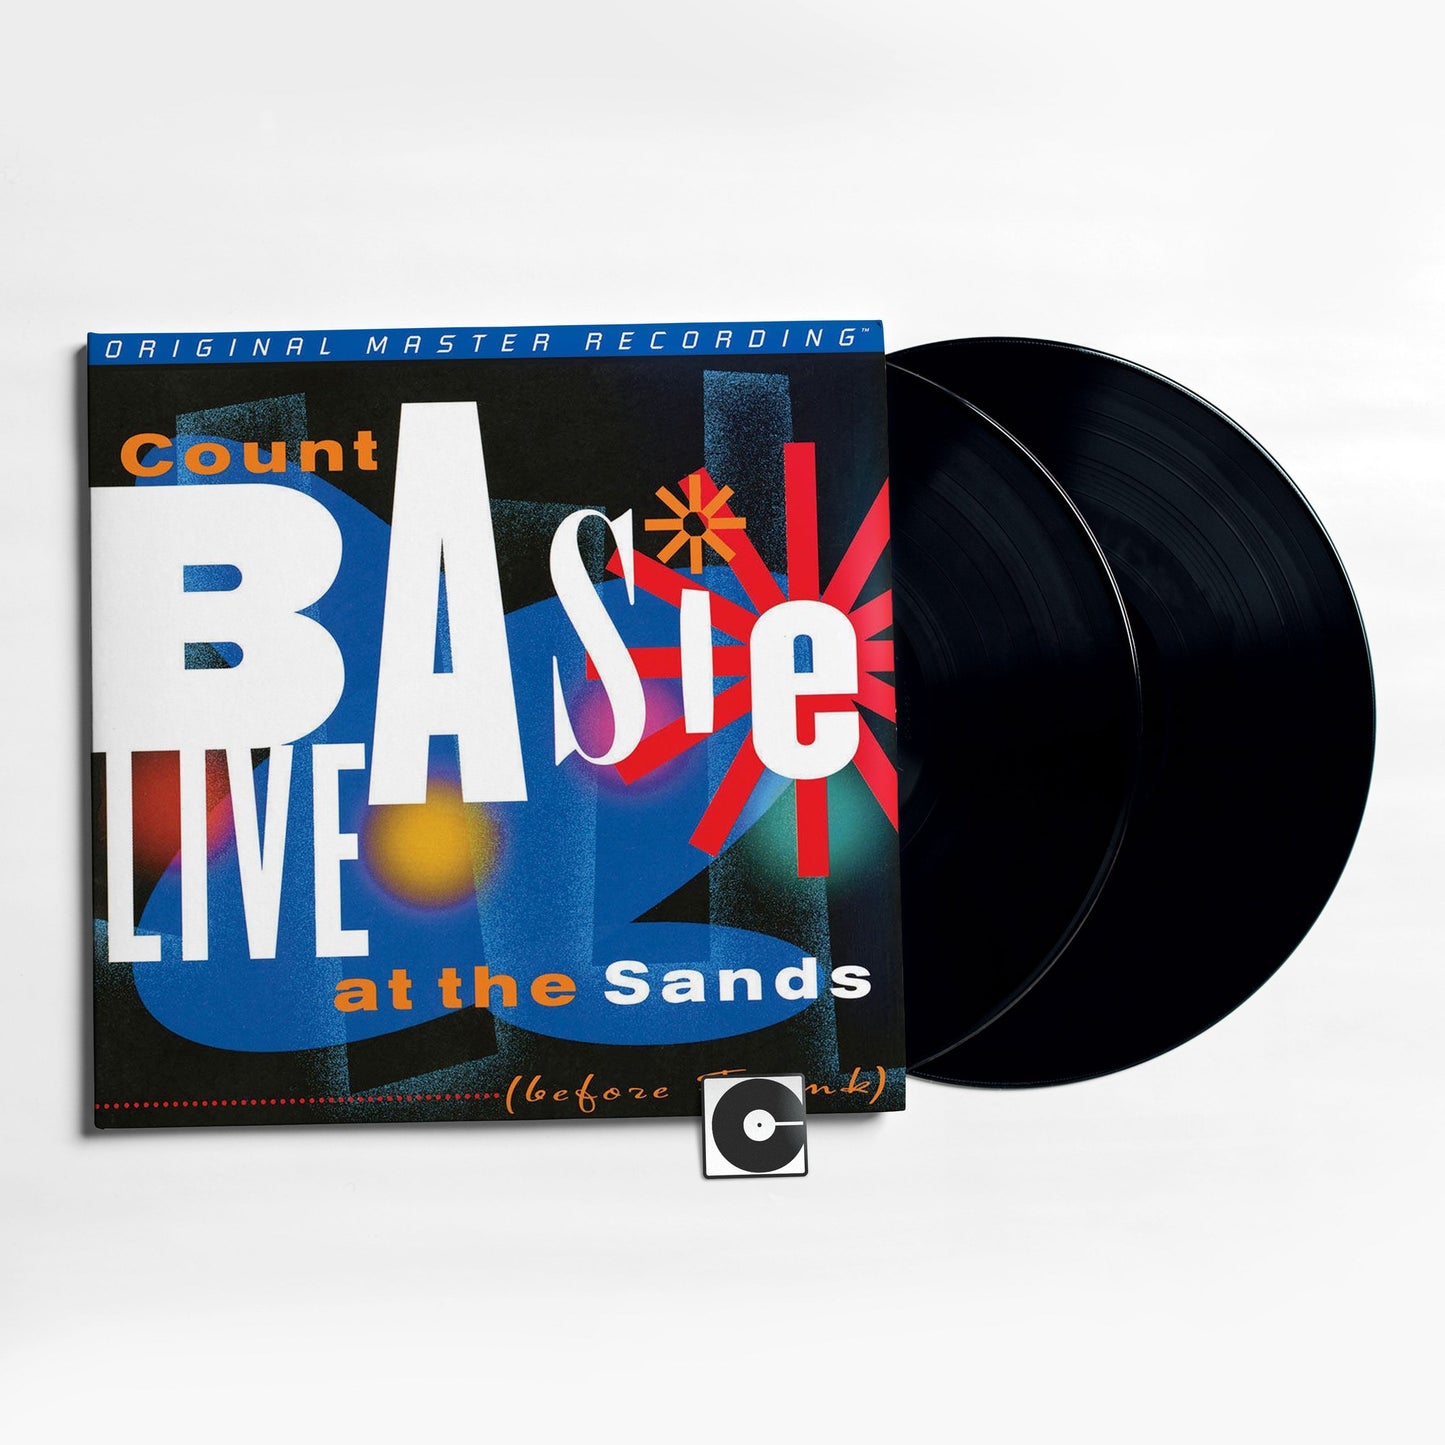 Count Basie - "Live At The Sands" MoFi